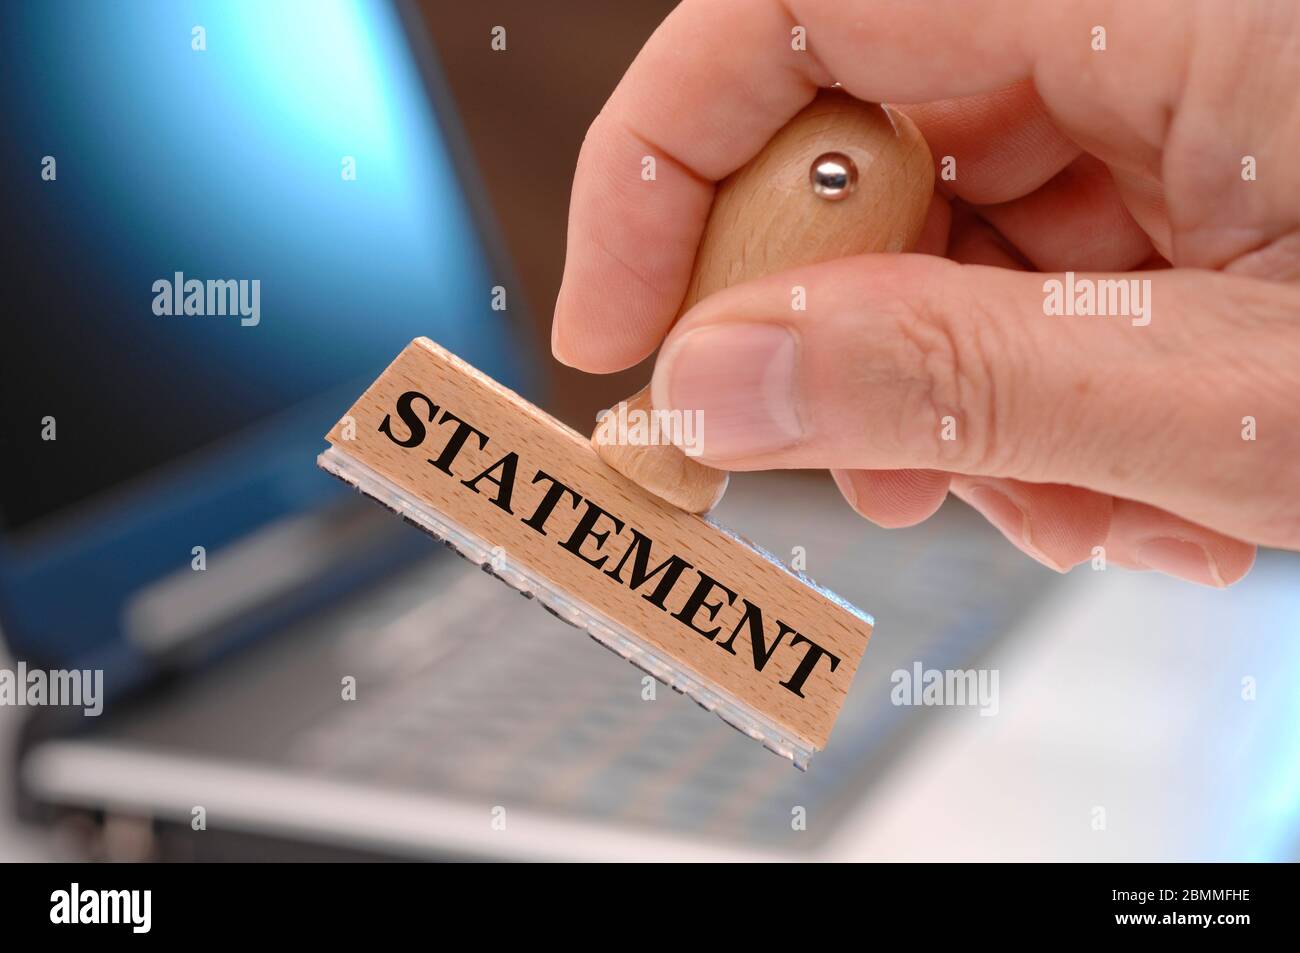 statement  printed on rubber stamp in hand Stock Photo